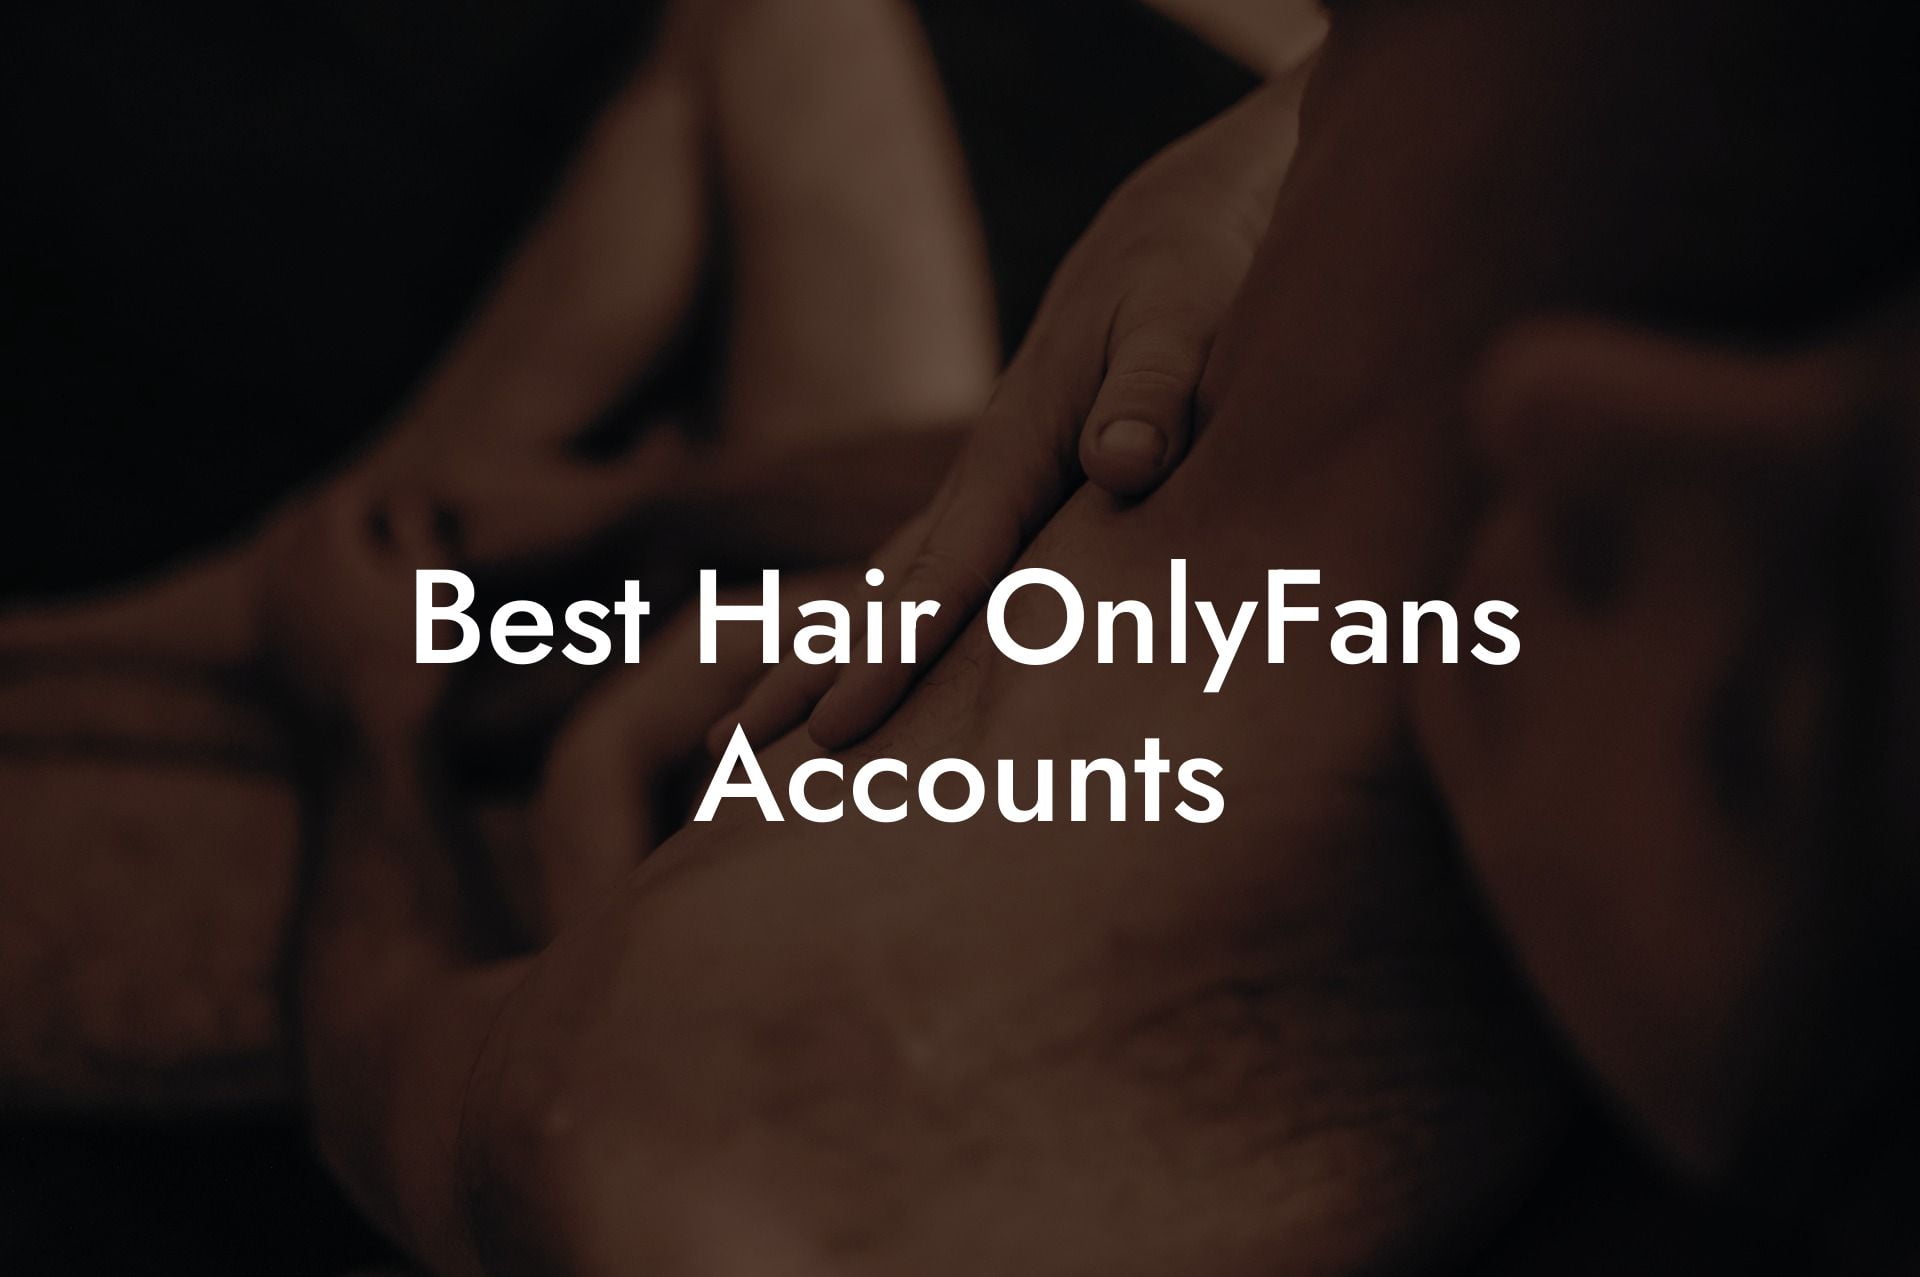 Best Hair OnlyFans Accounts